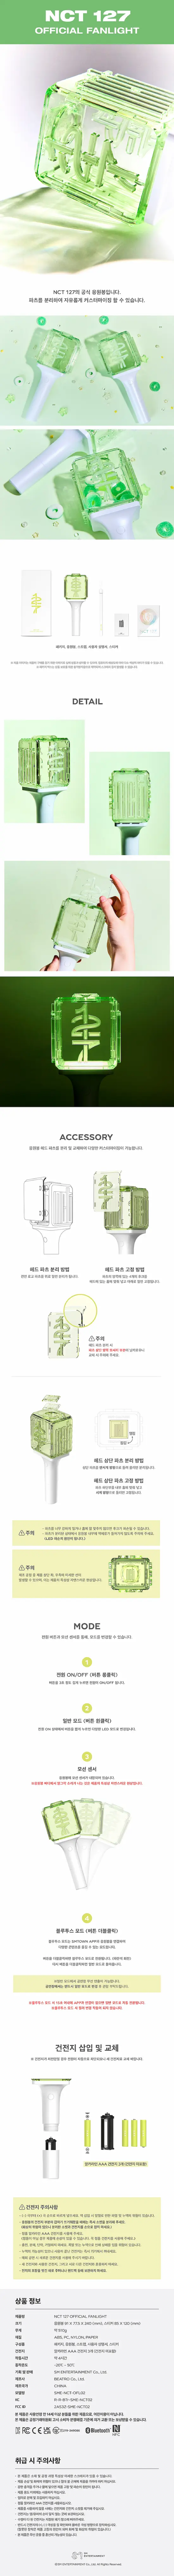 NCT 127 Official Light Stick contents